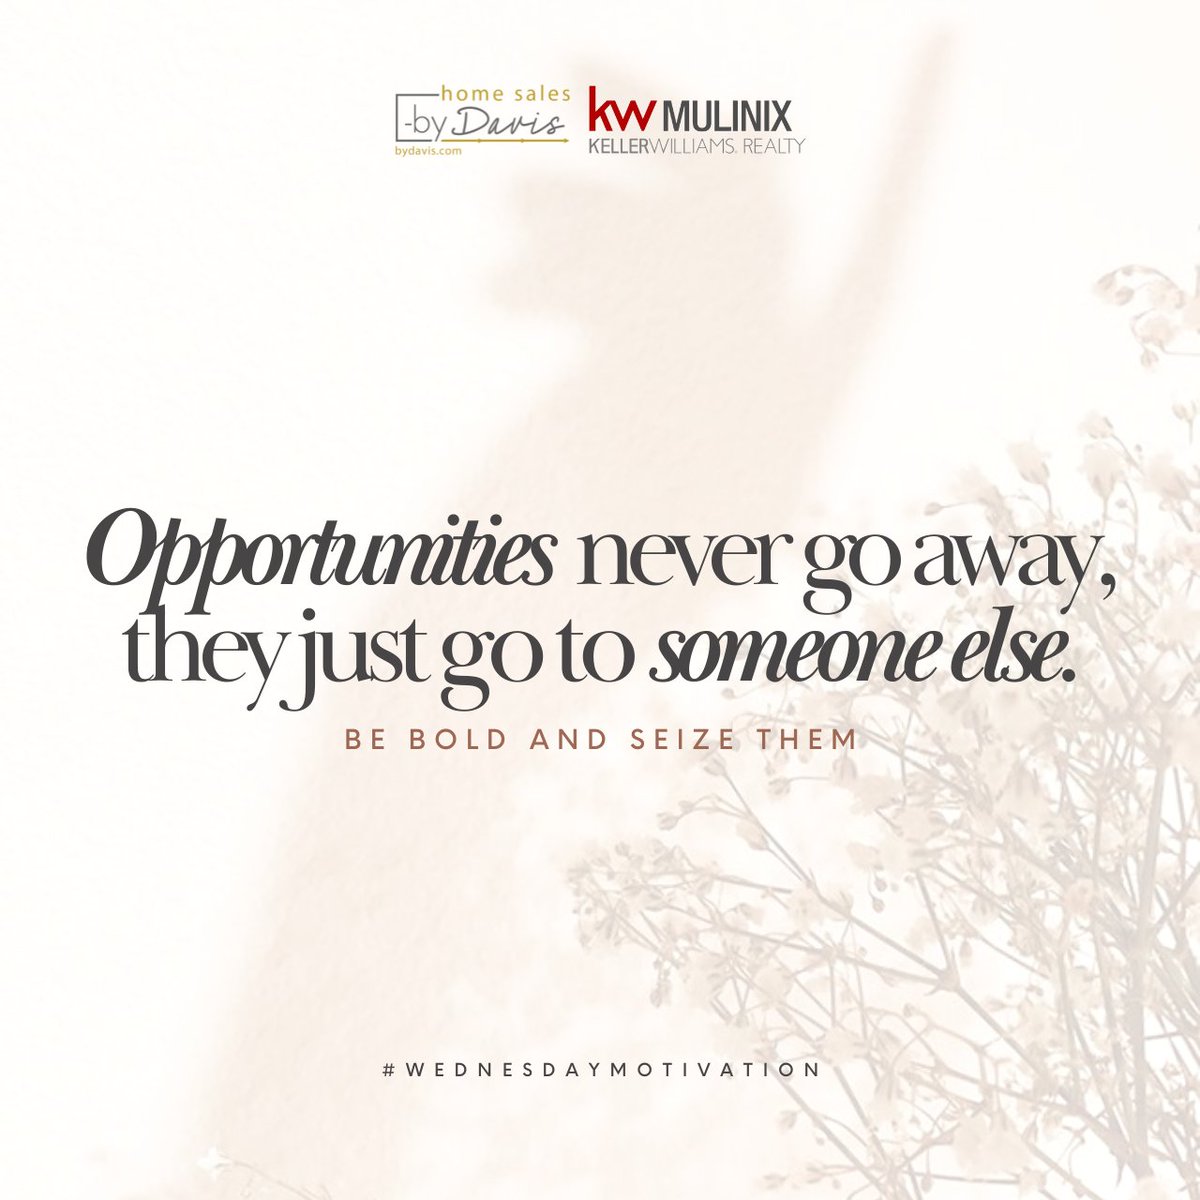 There are opportunities everywhere, it’s just a matter of taking them. 😉 

Happy Wednesday! 🙌

#motivationalquote #PositiveWednesday #opportunities #realestateadvice #realestatetips #buy #sell #invest #instagood #realestateagent #realestate #oklahoma #okc #homesalesbydavis #kw